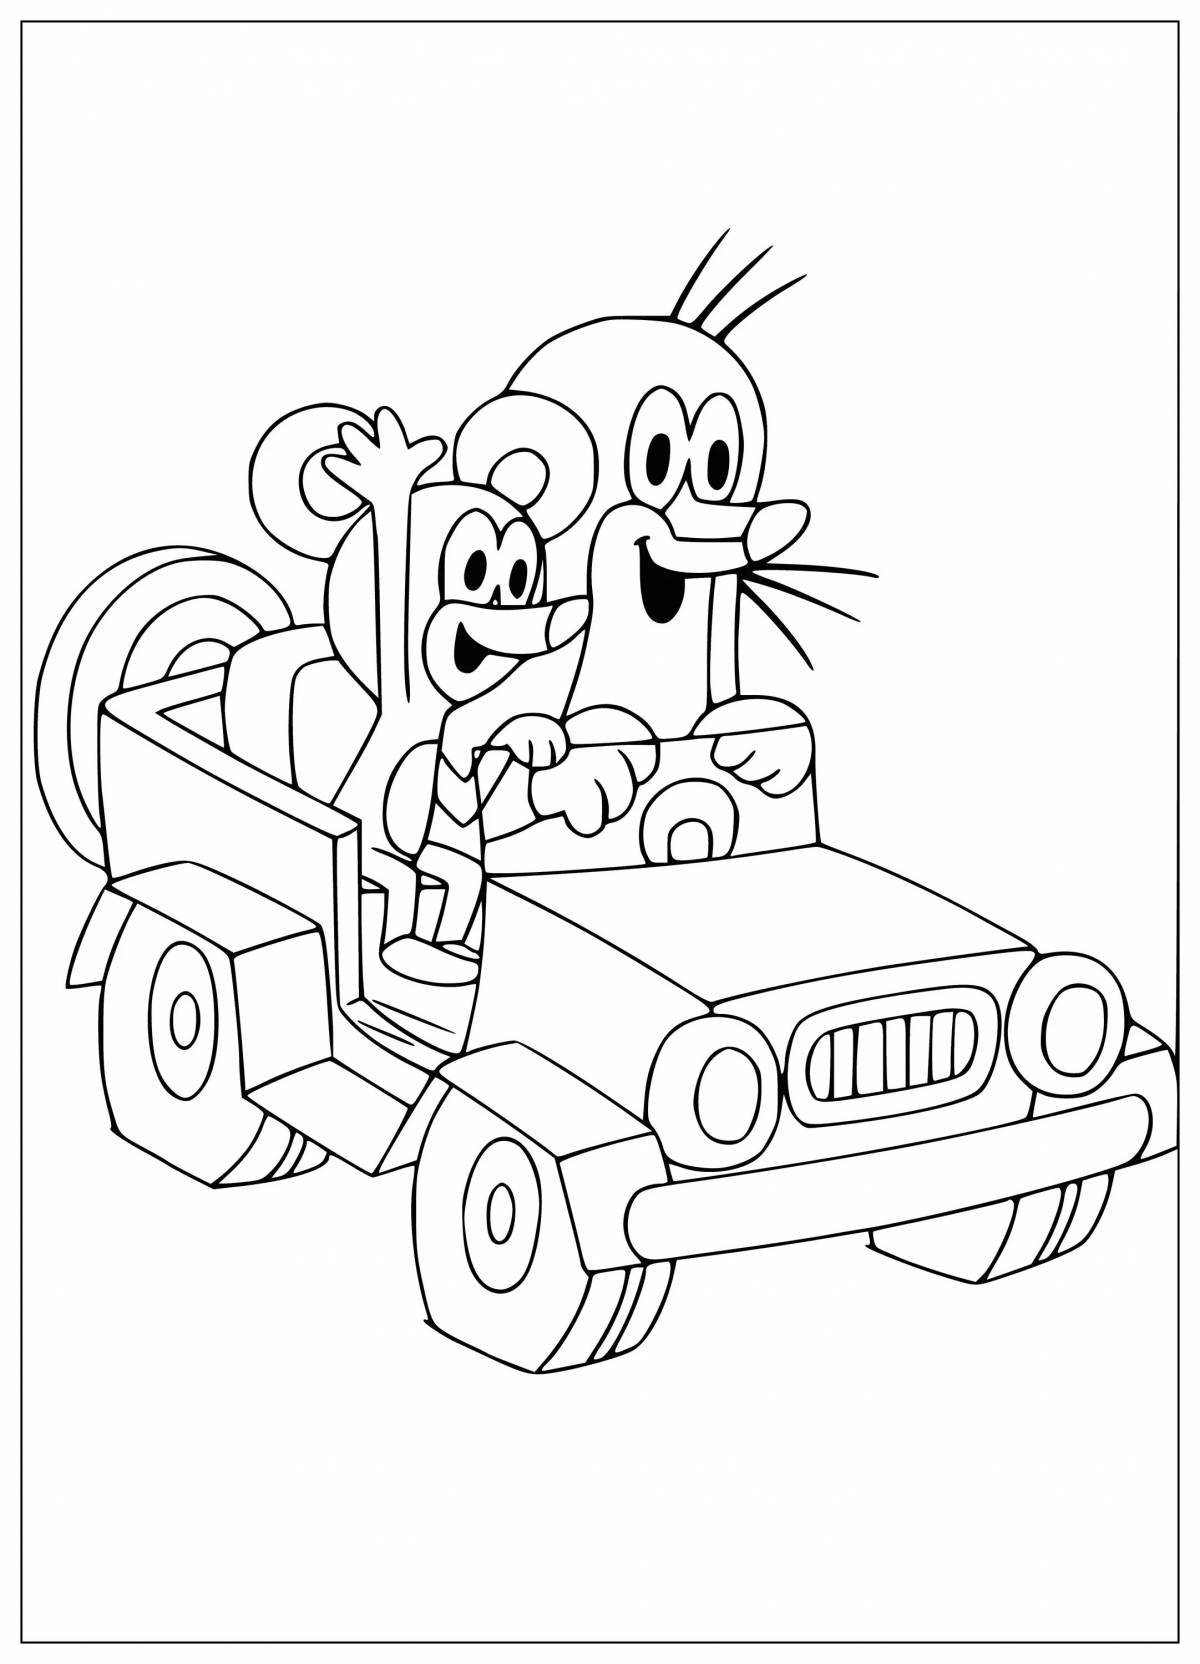 Gorgeous car coloring page